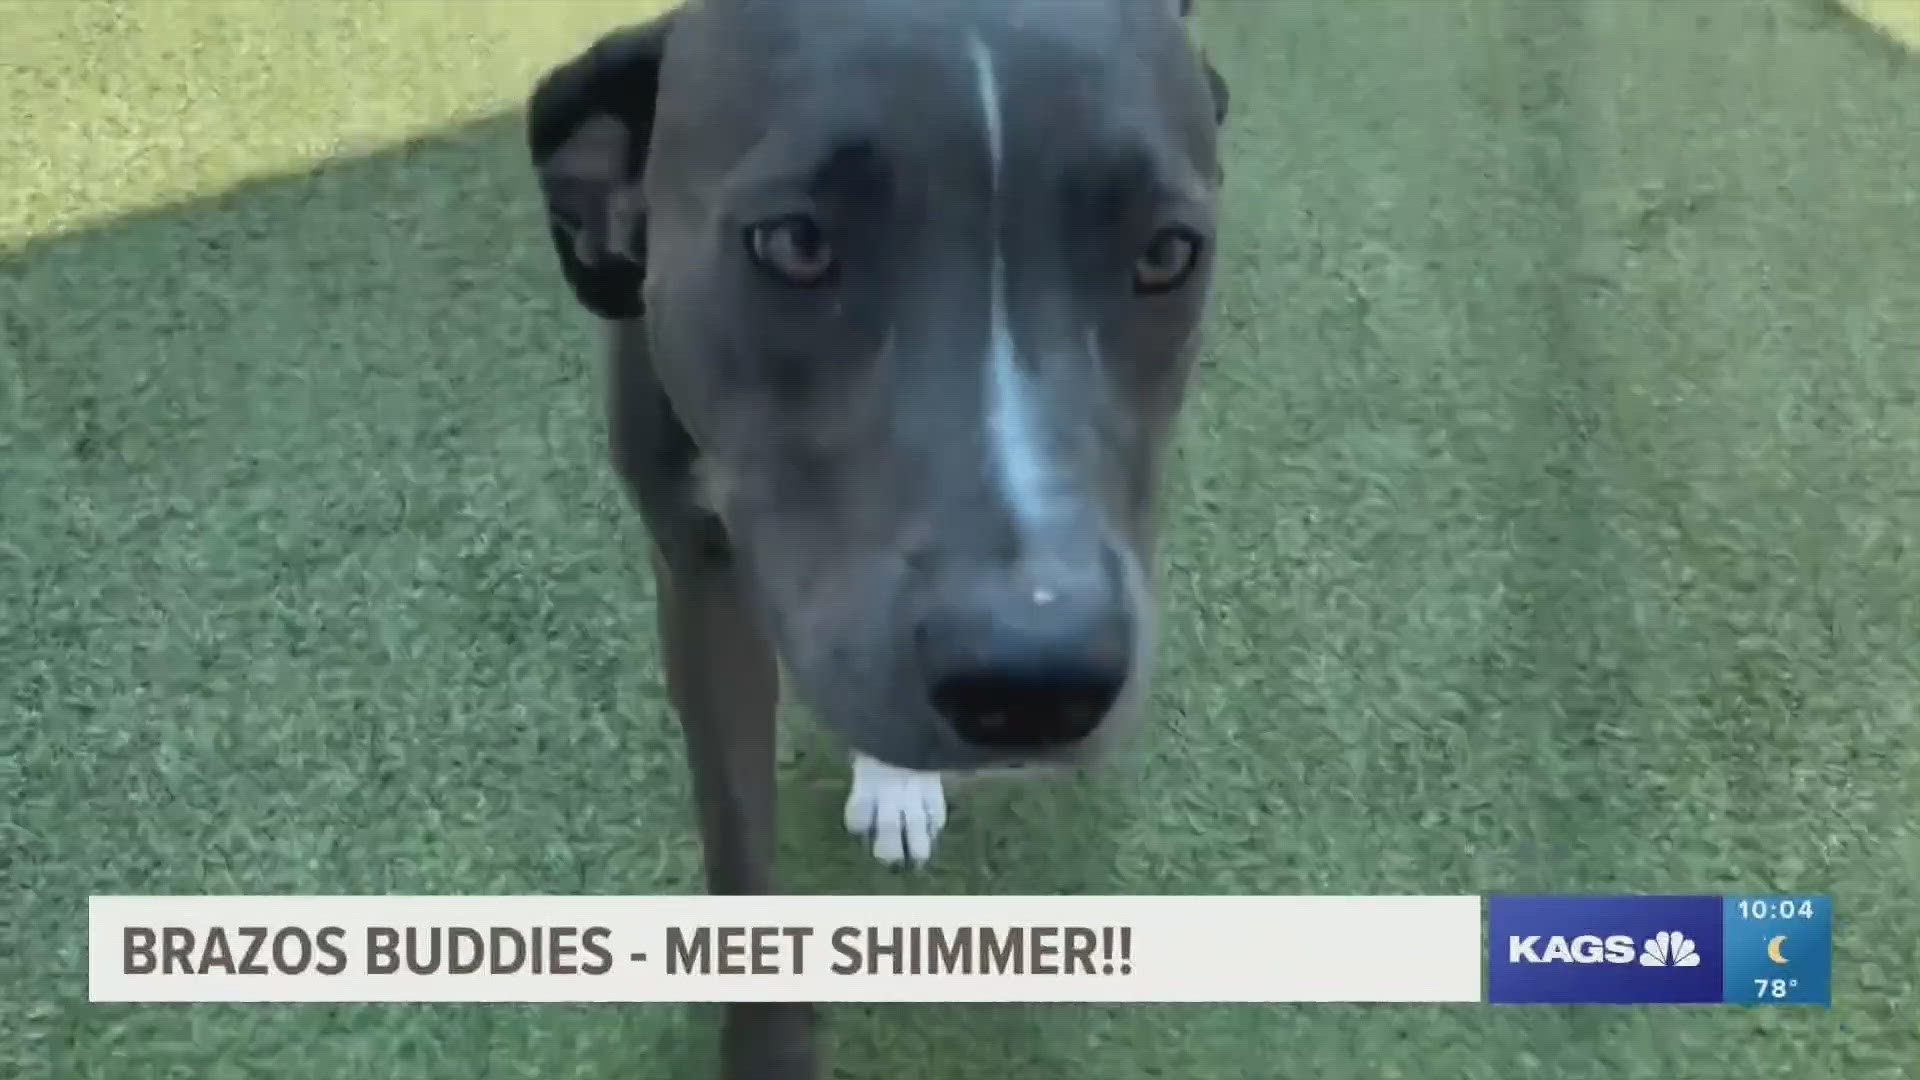 This week's featured Brazos Buddy is Shimmer, a three-year-old Pit Bull mix that's looking to be adopted.